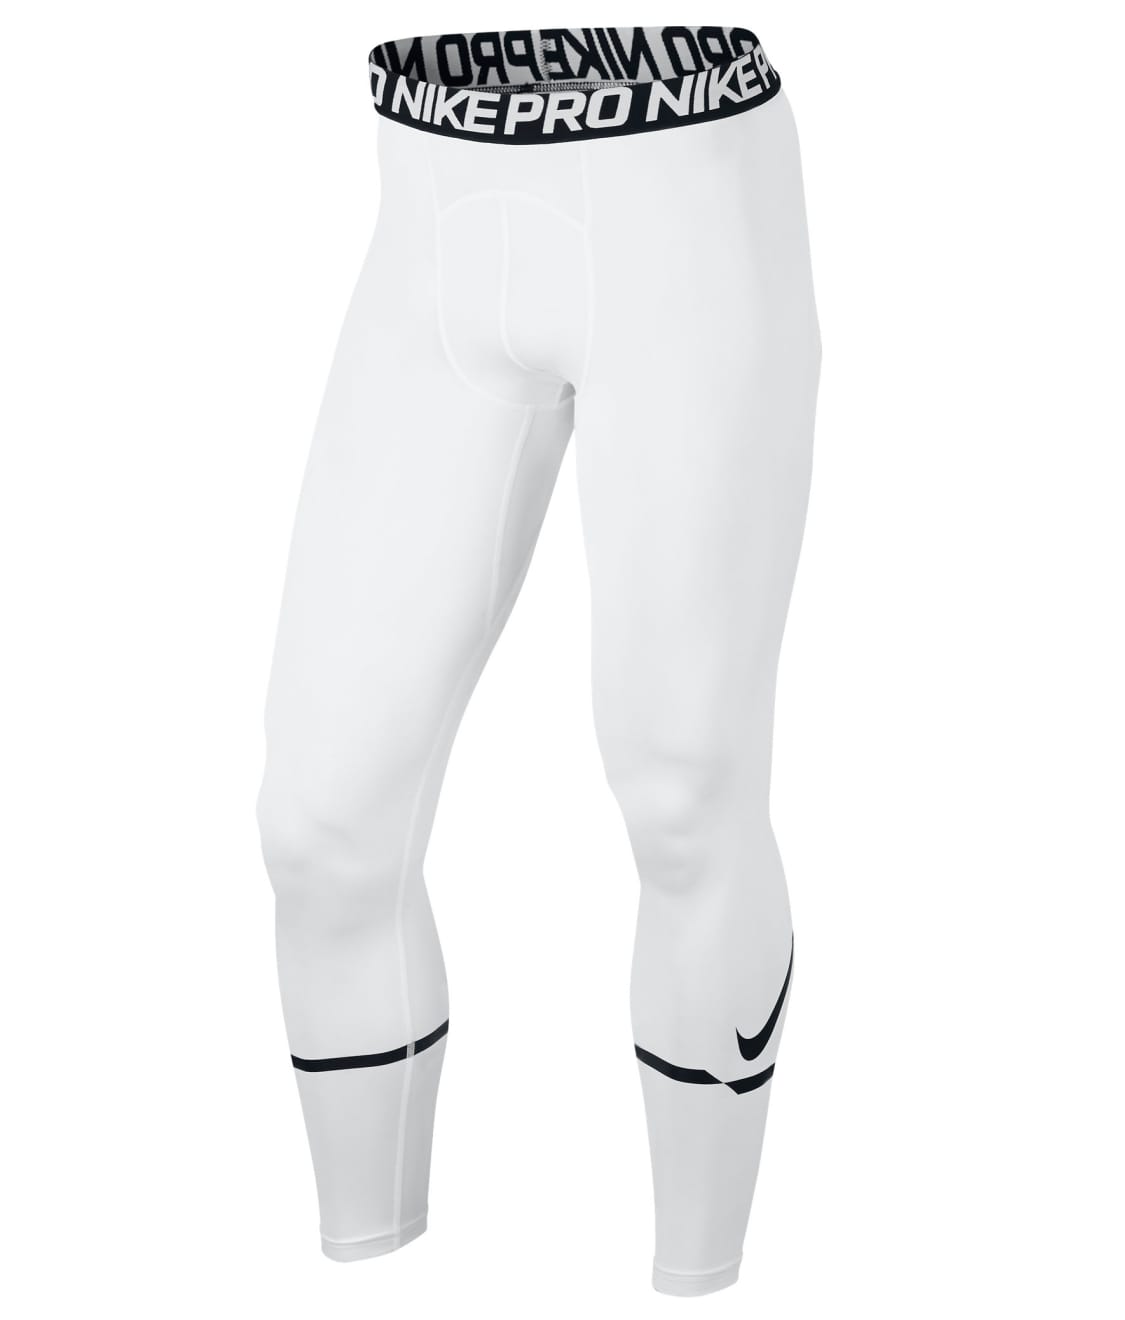 Nike Pro Compression & Reviews | Necessities (Style 828535)